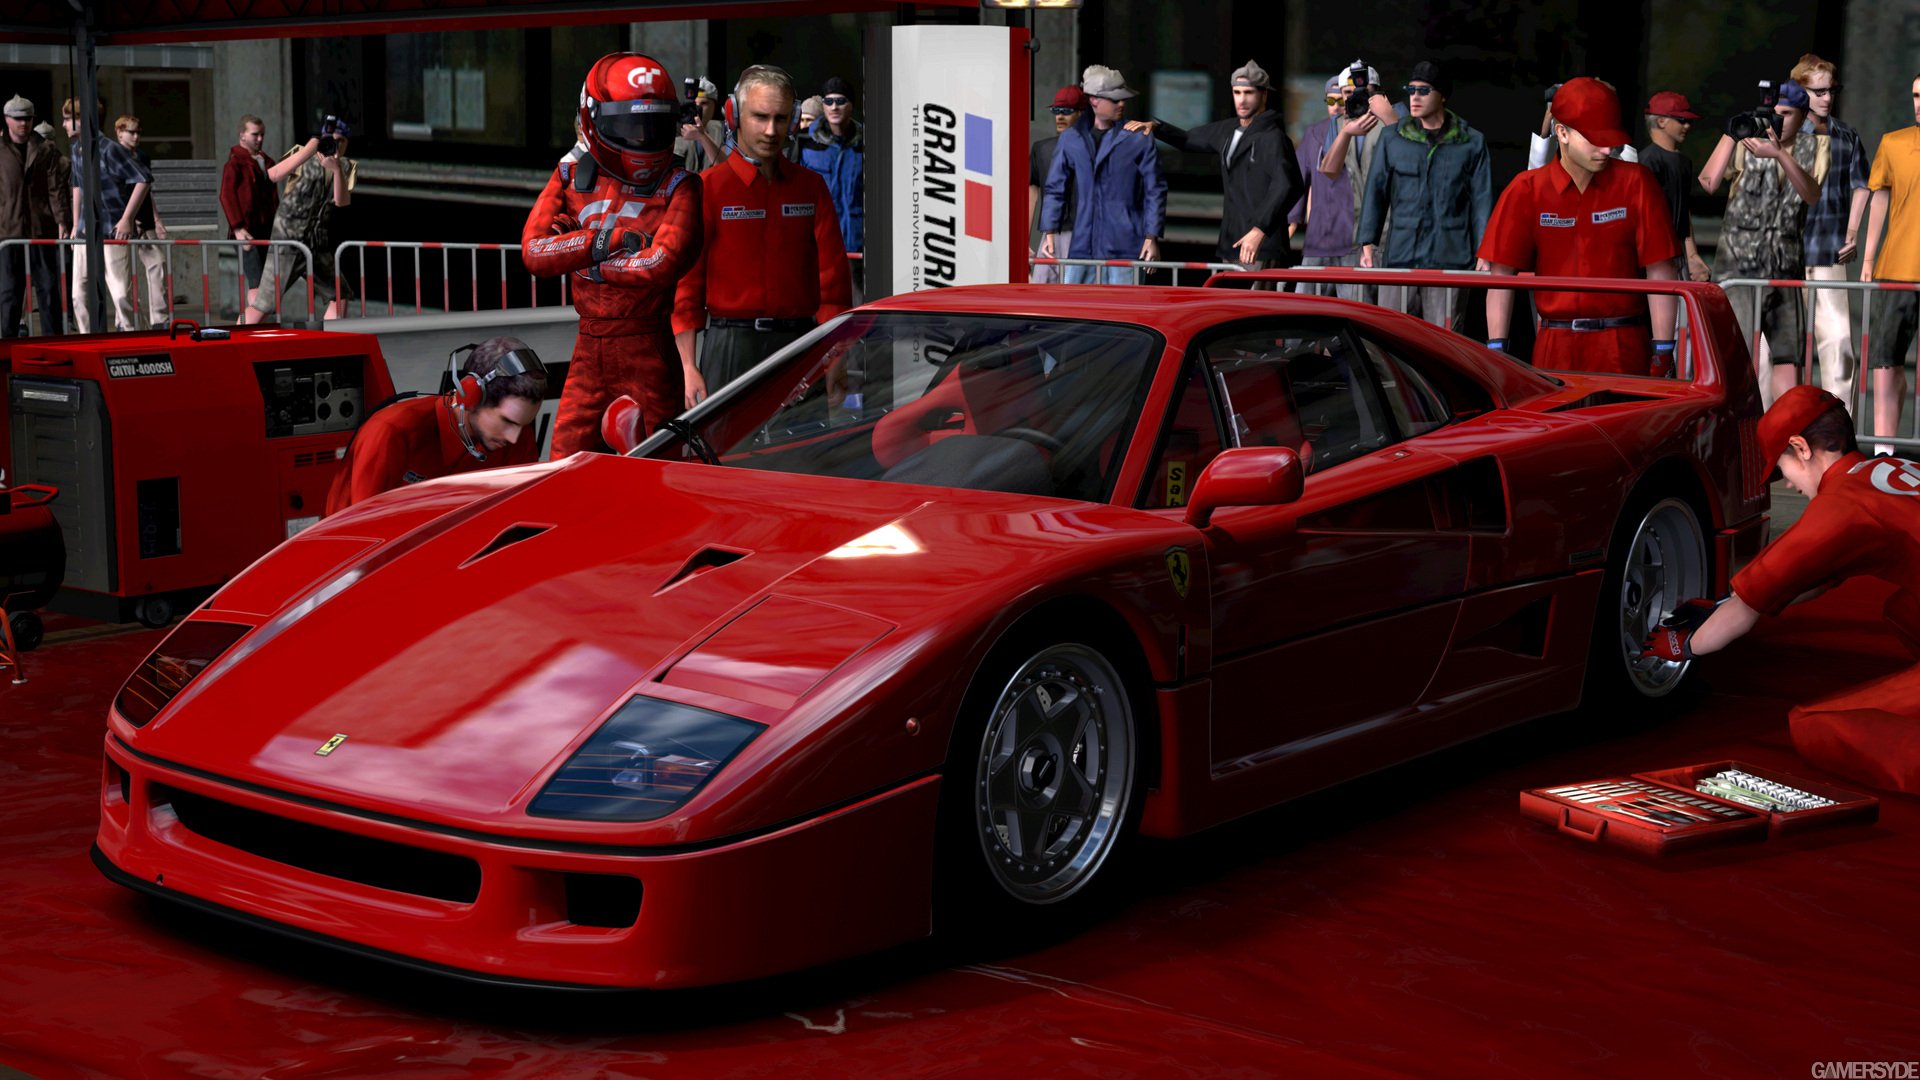 Gran Turismo 5 Prologue HD Wallpapers and Backgrounds